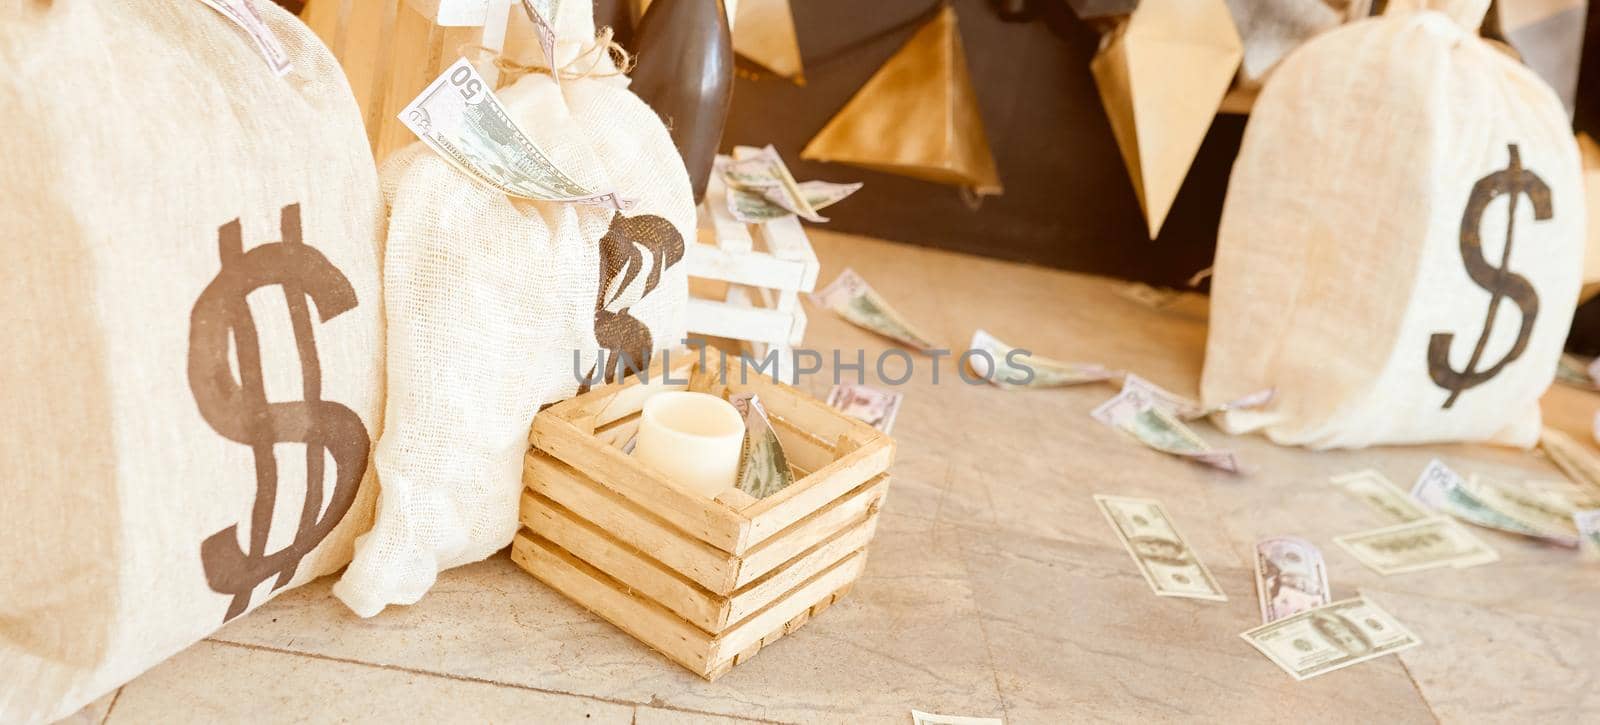 Big Bag Of Money on ground with wood box and future background. High quality banner